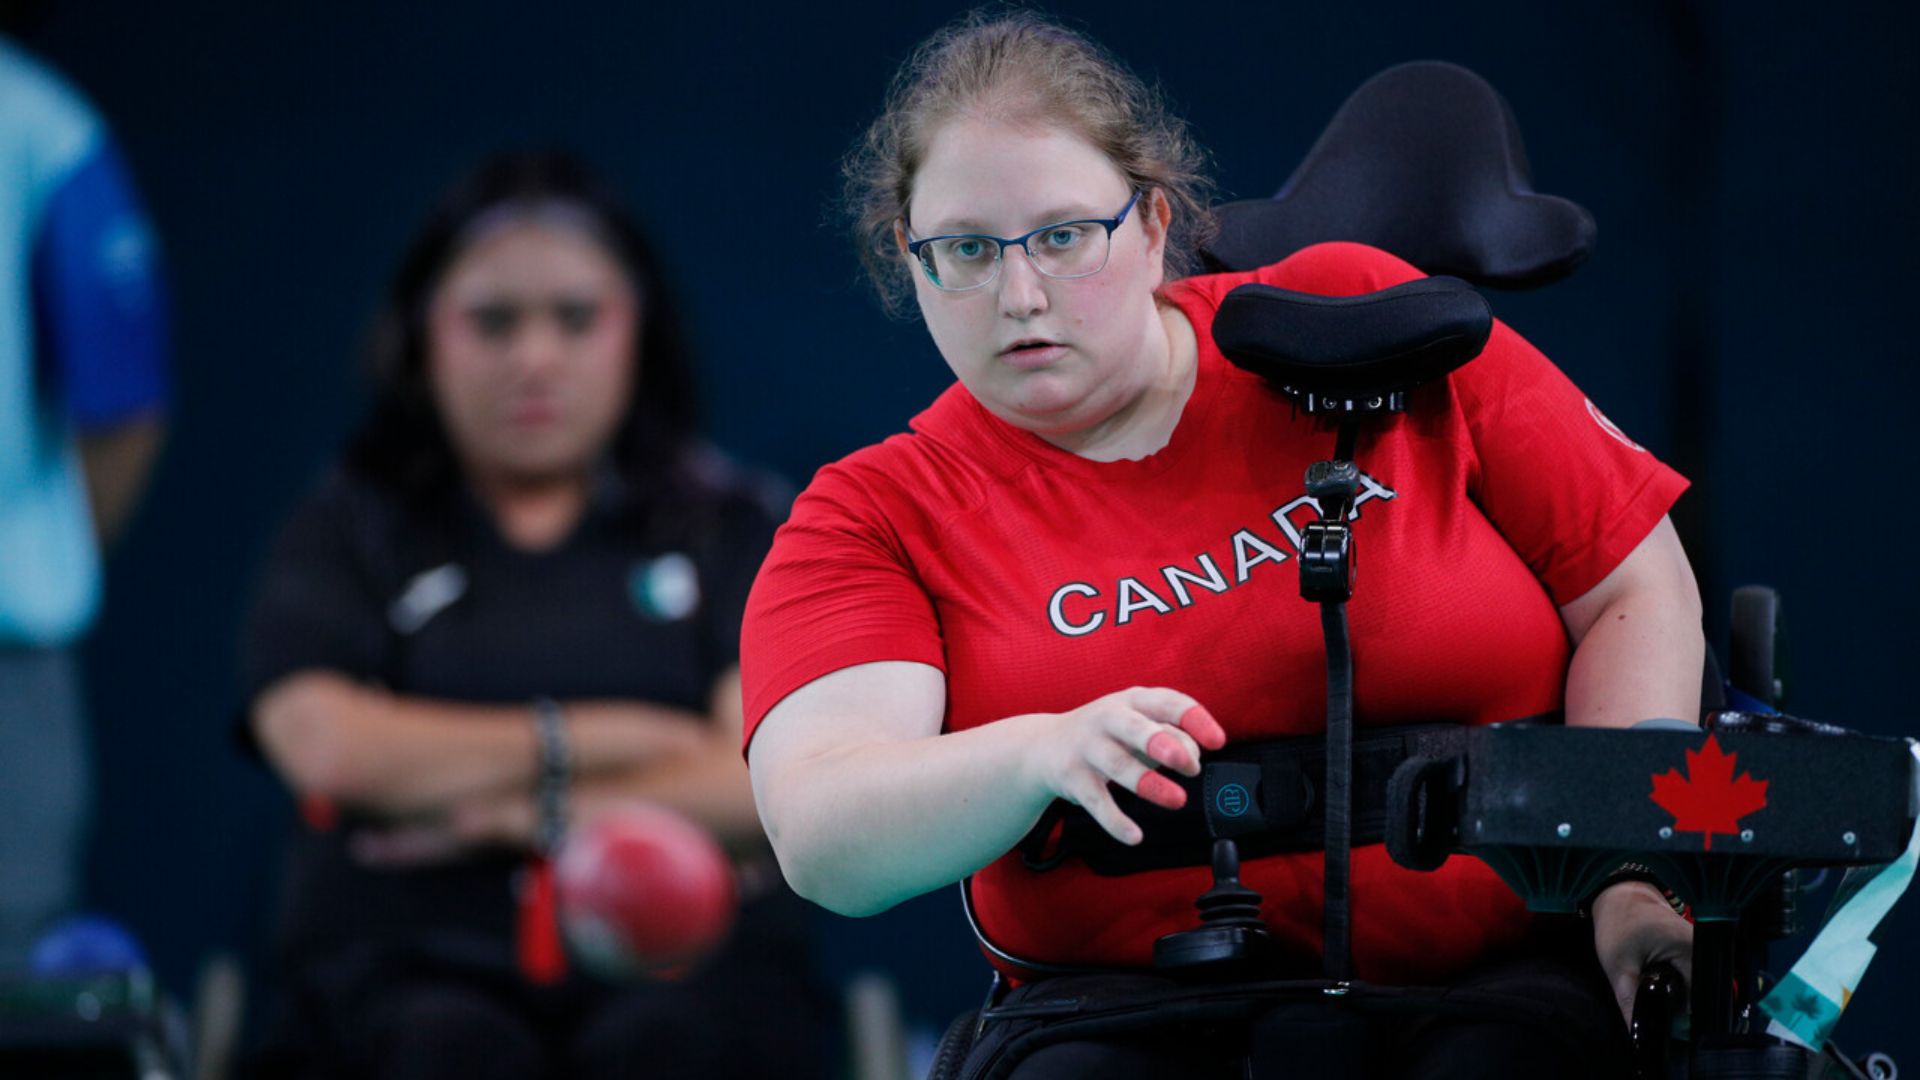 The First Final of the Parapan American Boccia in Pairs has Been Defined